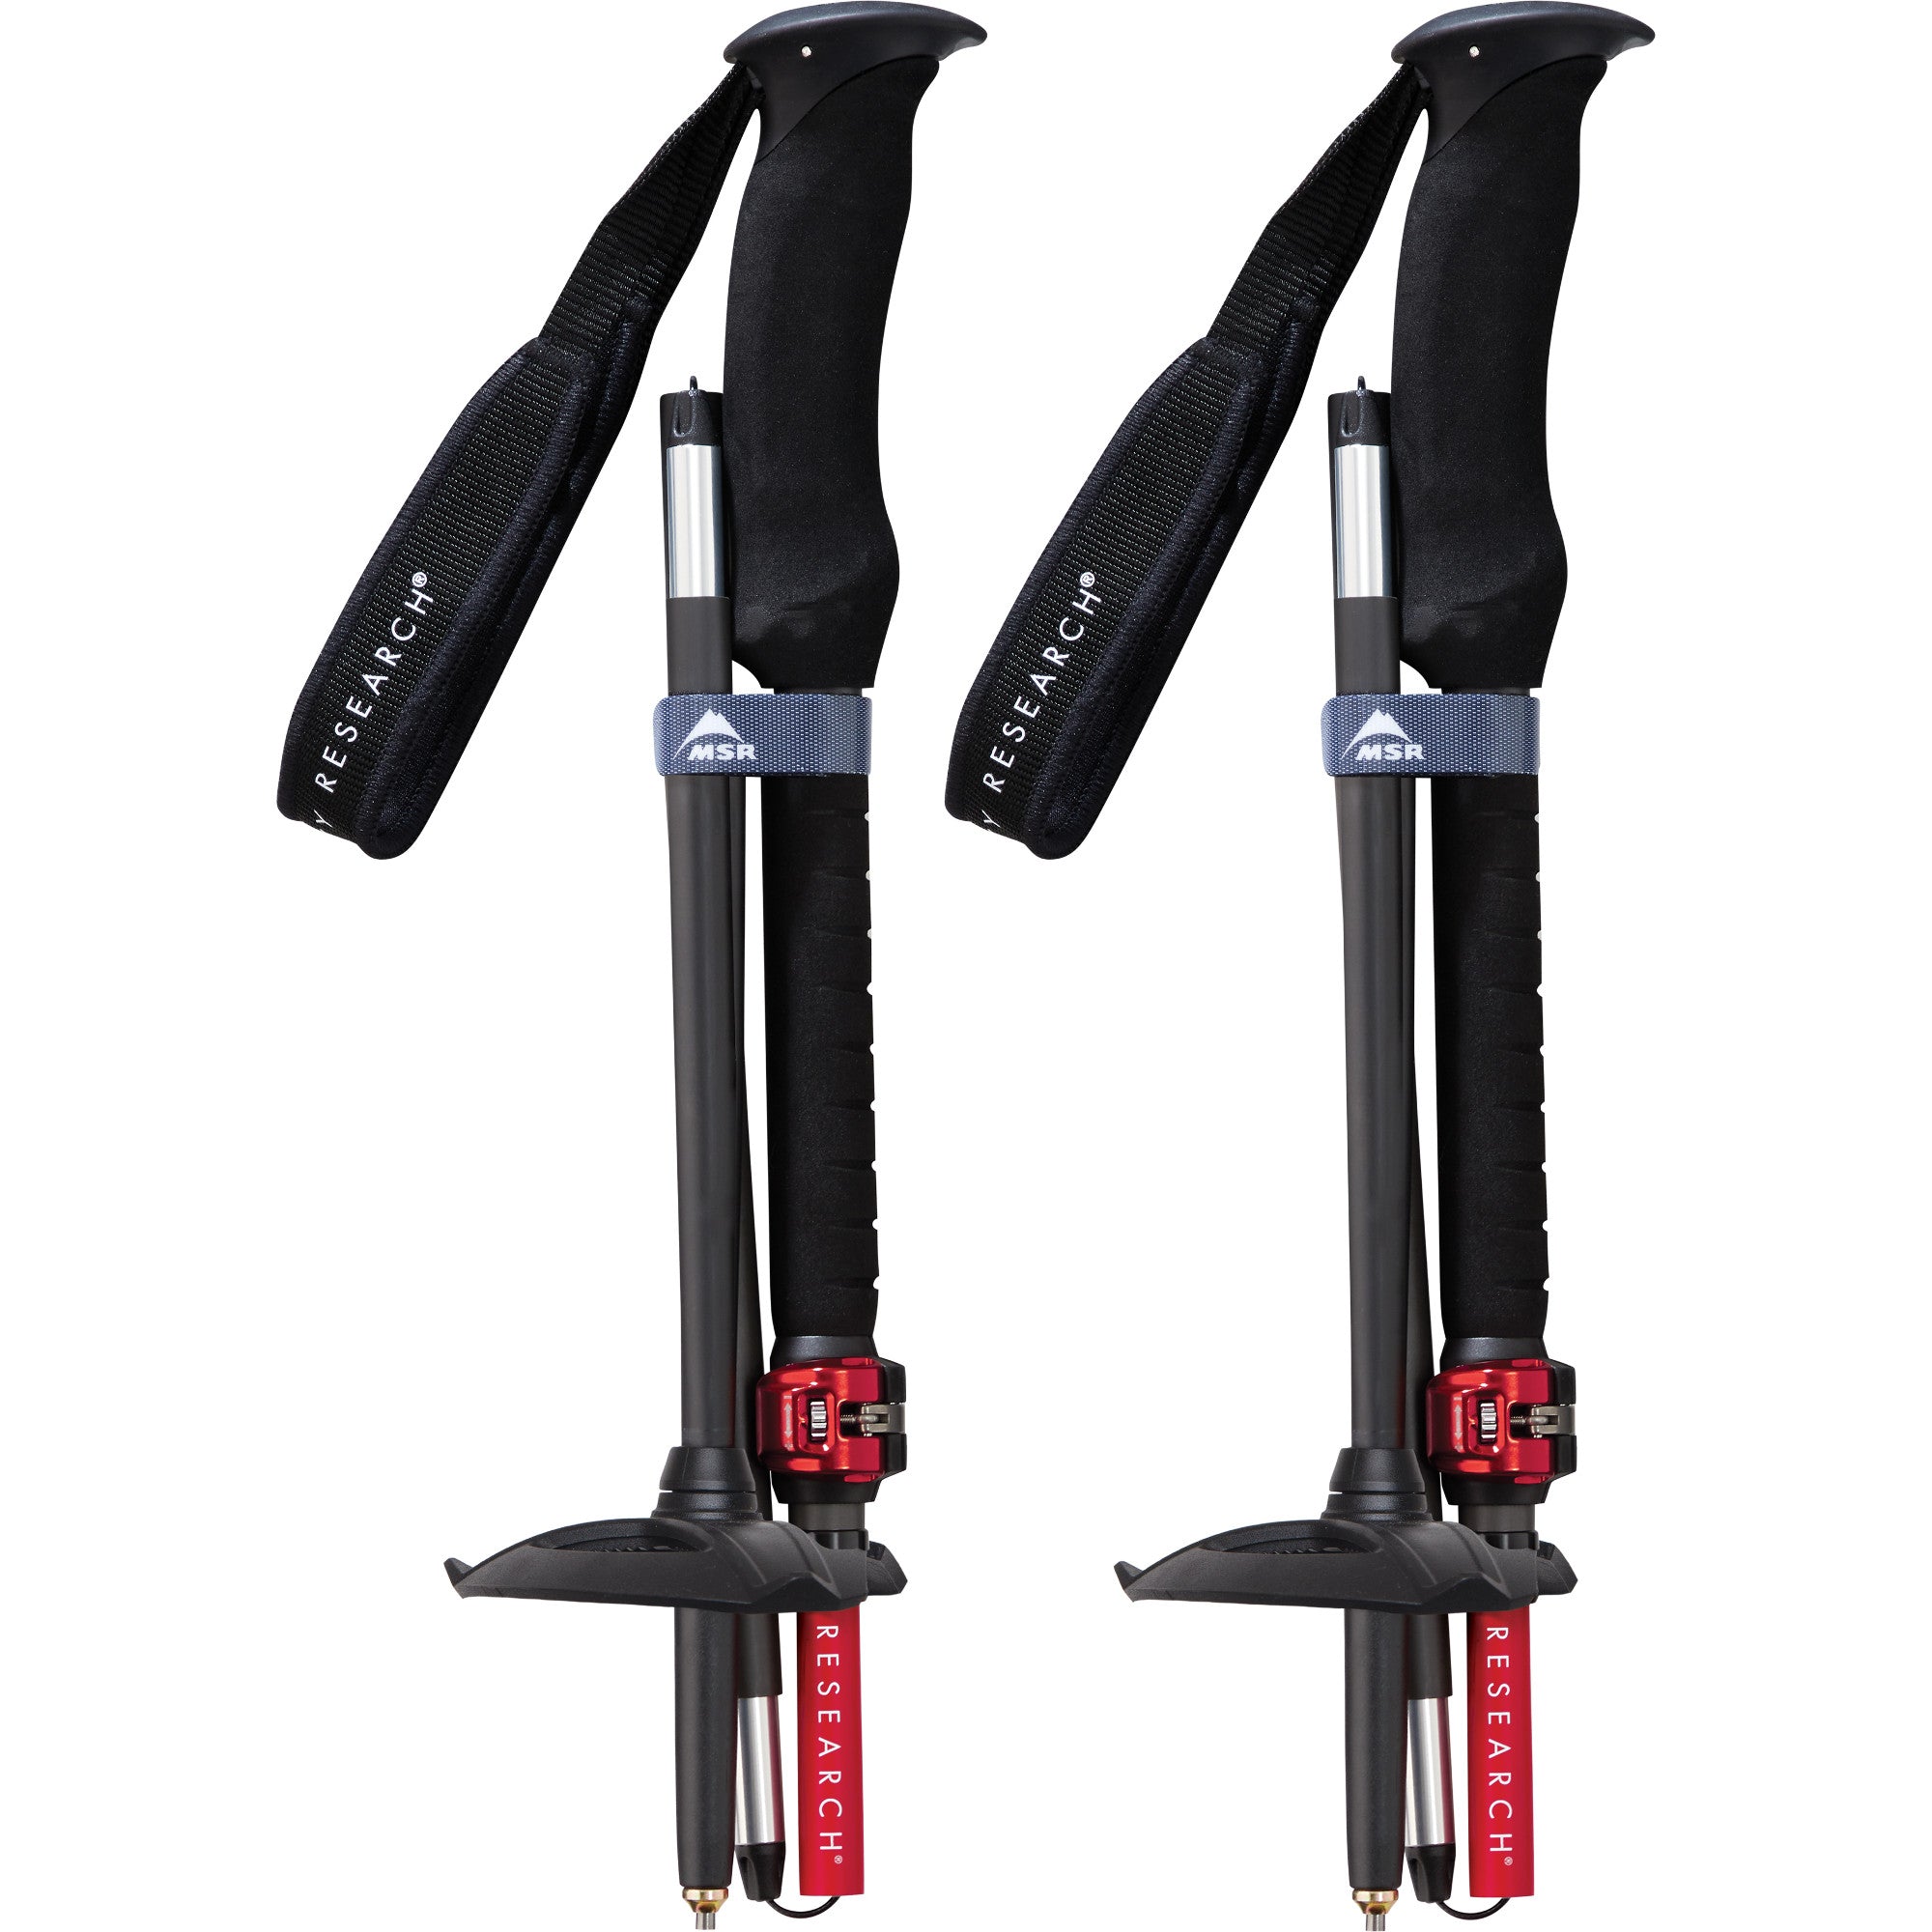 Pair of MSR Dynalock Ascent Carbon mountain poles, in Black/Grey/Red colours